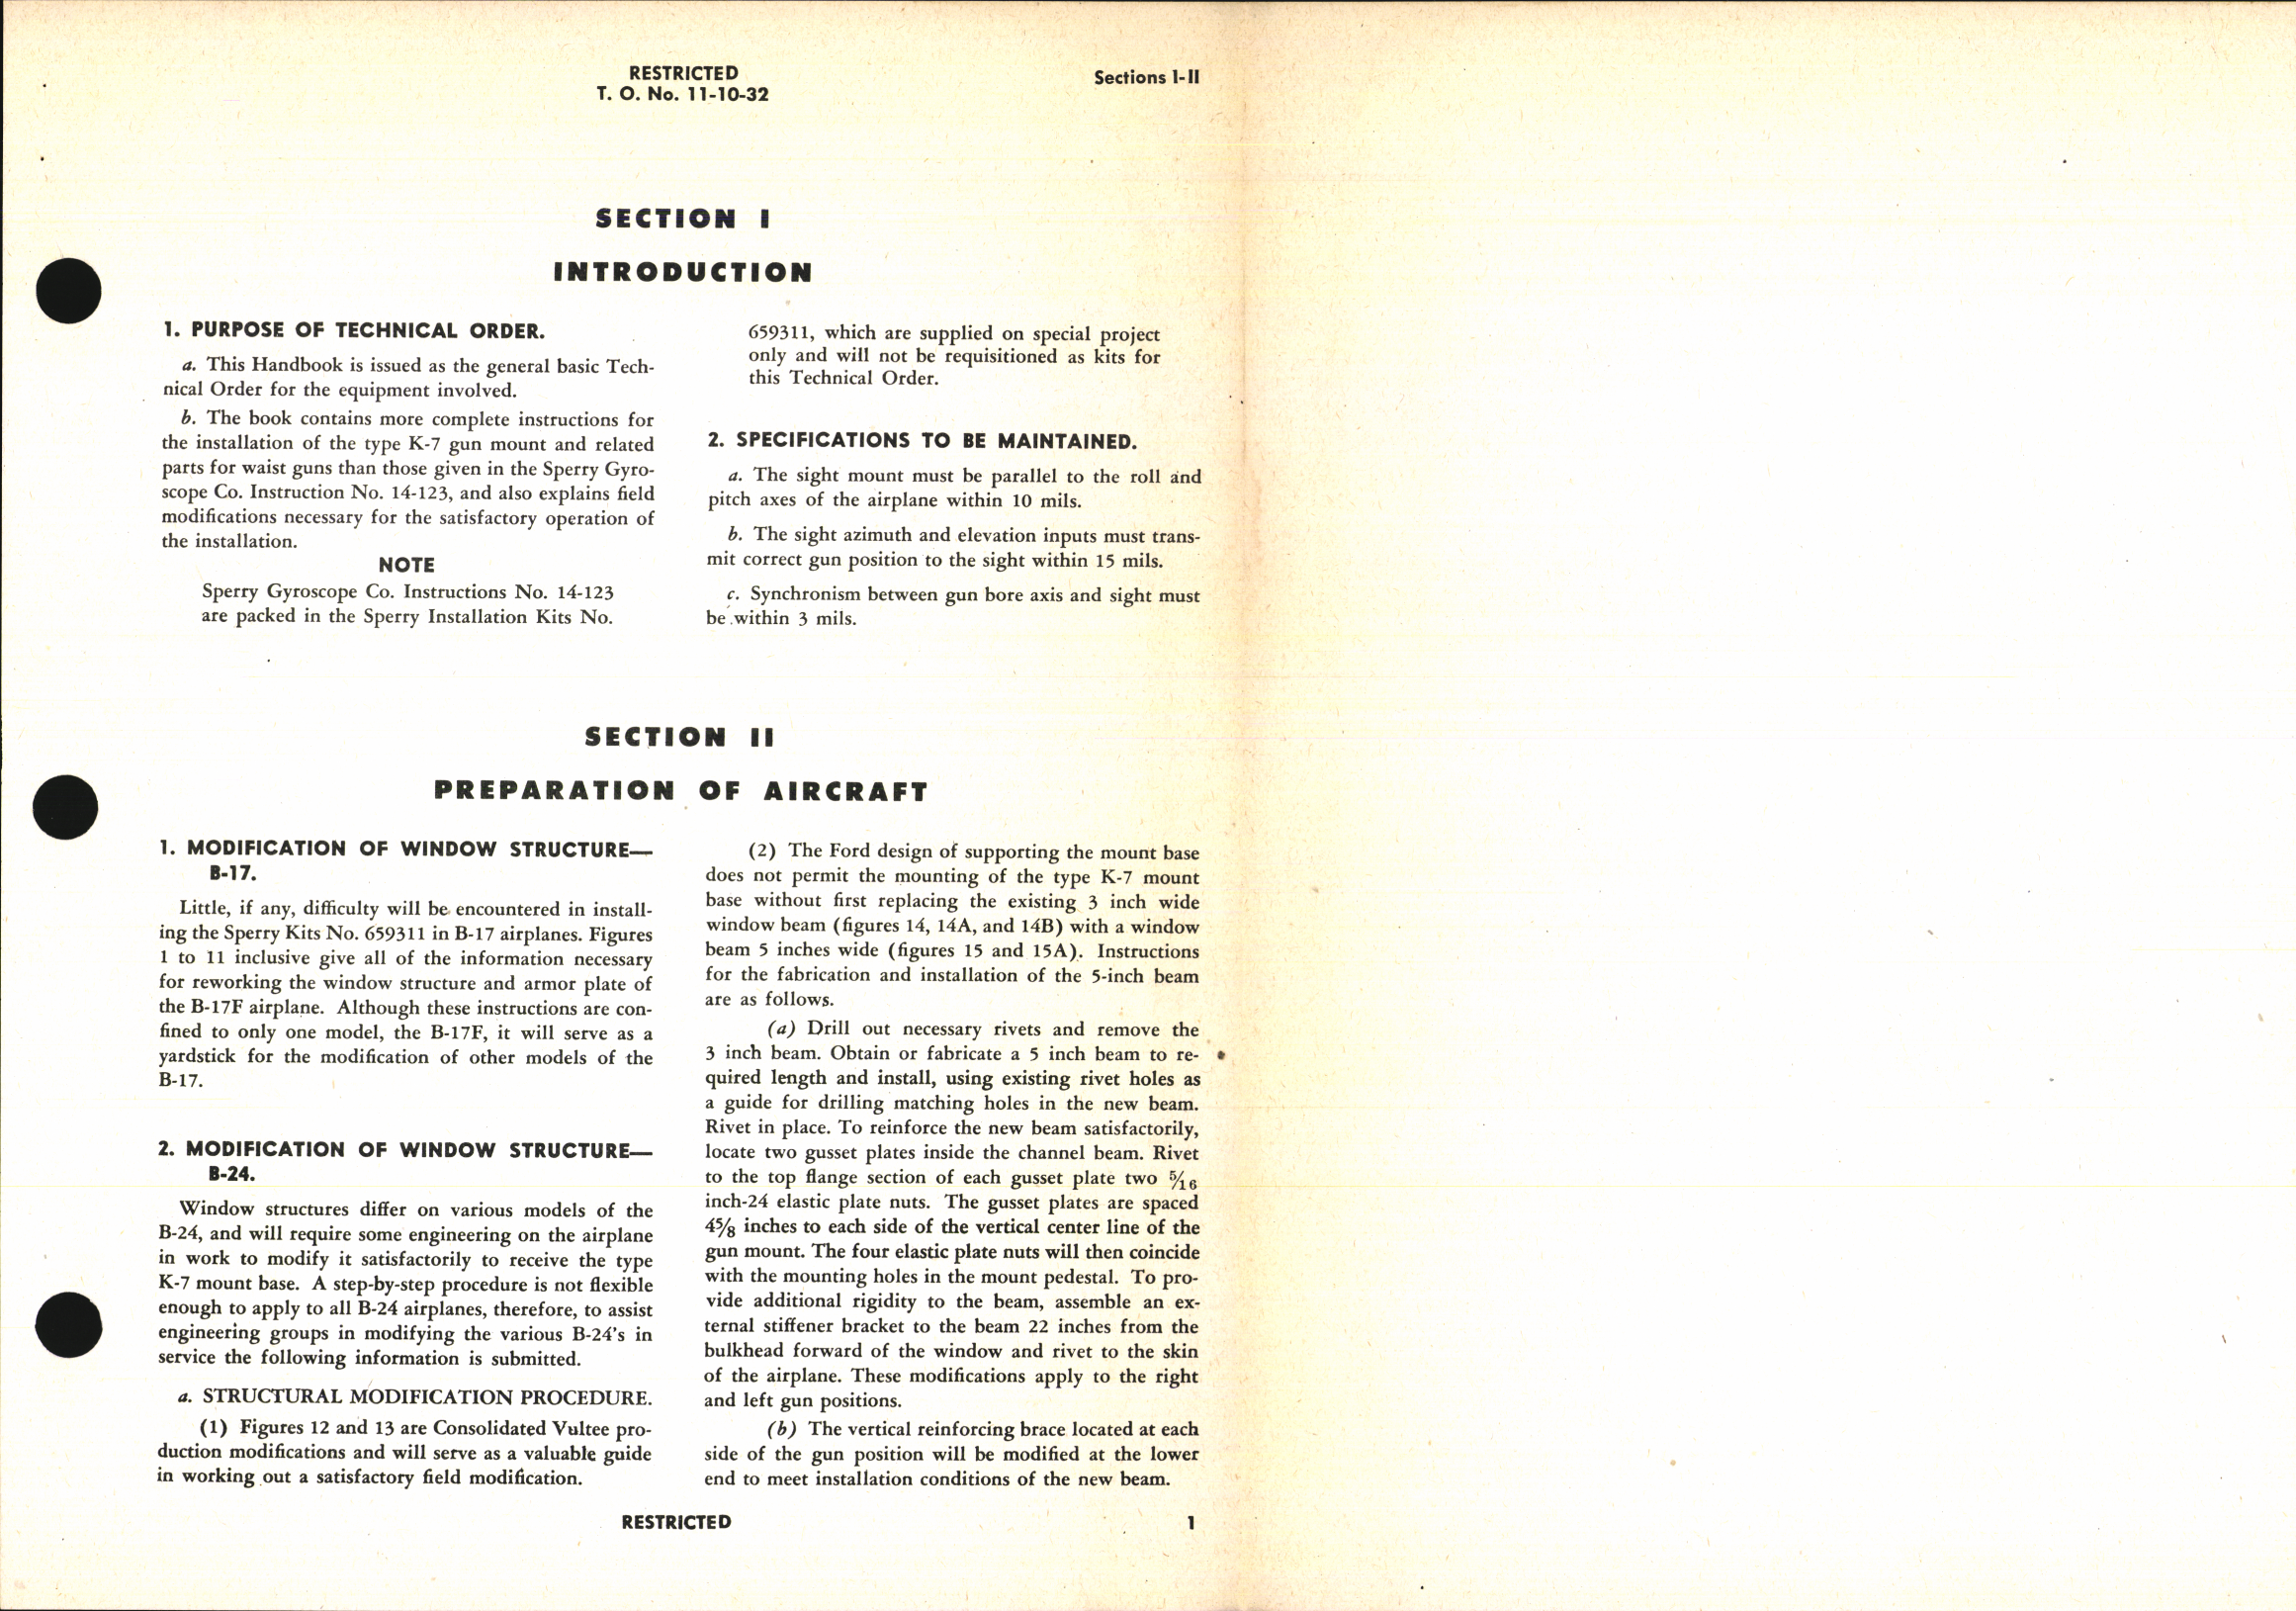 Sample page 5 from AirCorps Library document: Handbook of Instructions for the Installation of Type K-7 Gun Mount